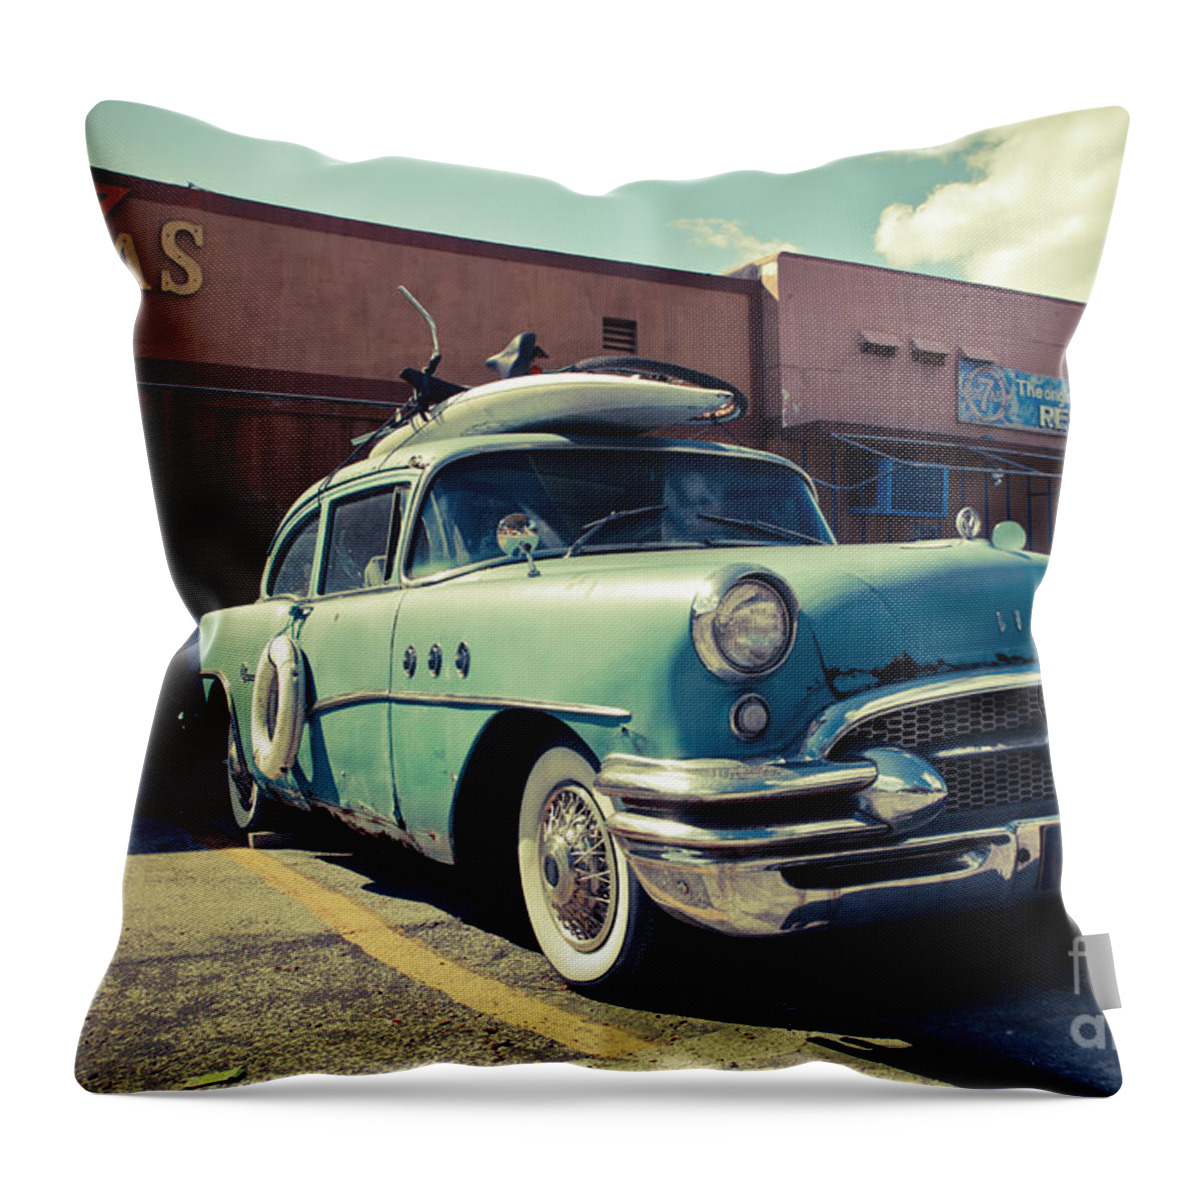 Miami Throw Pillow featuring the photograph Buick by Hannes Cmarits